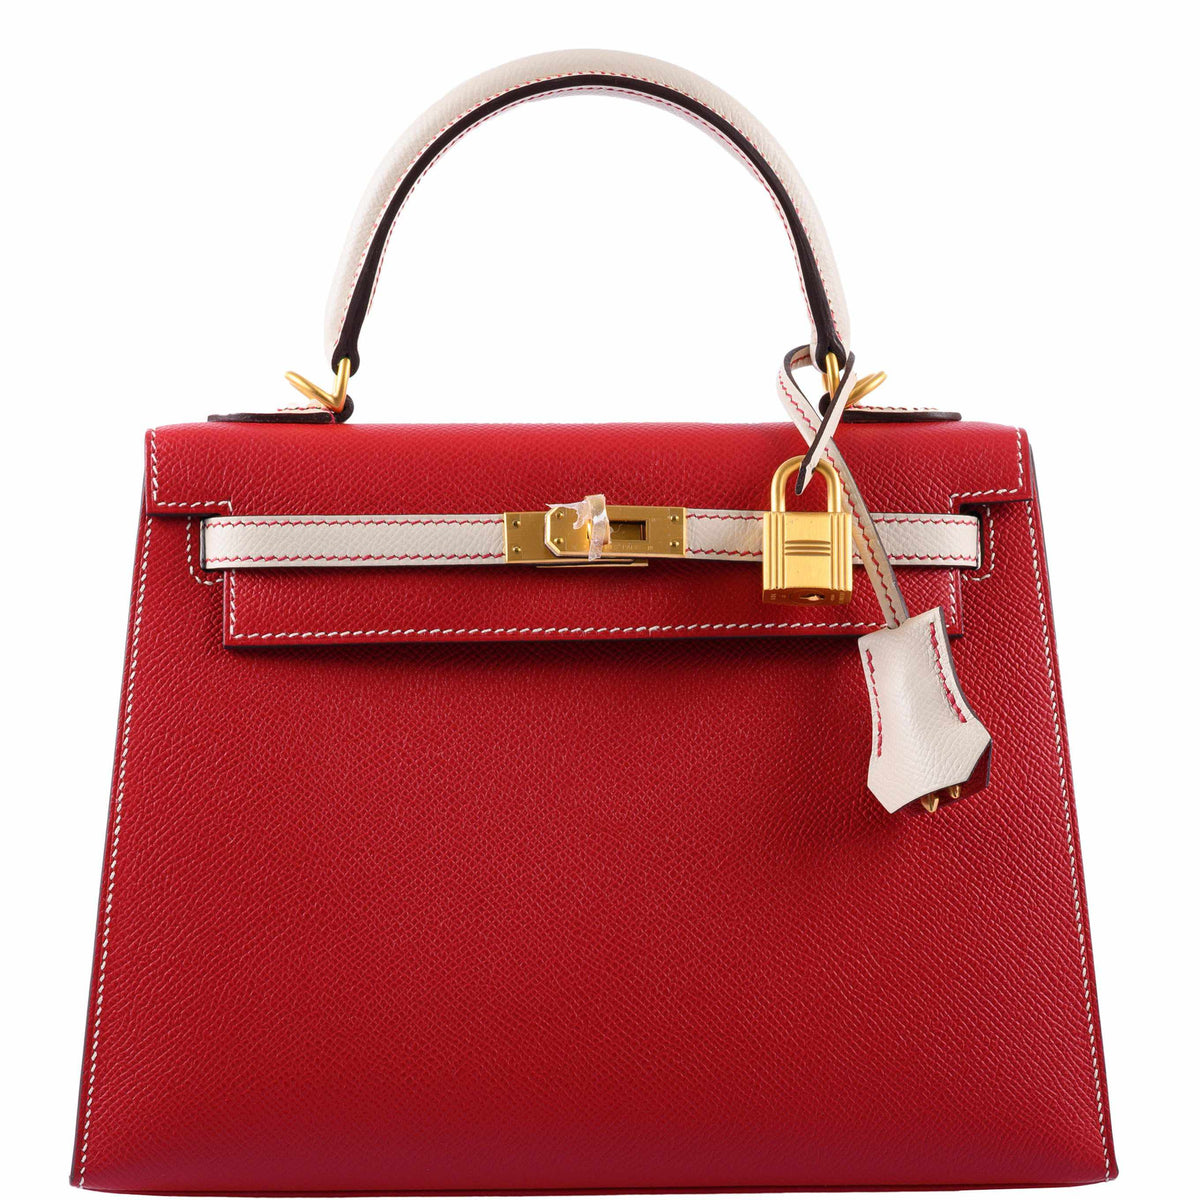 Kelly 25 - Rouge Sellier Swift CK – 16 Montaigne